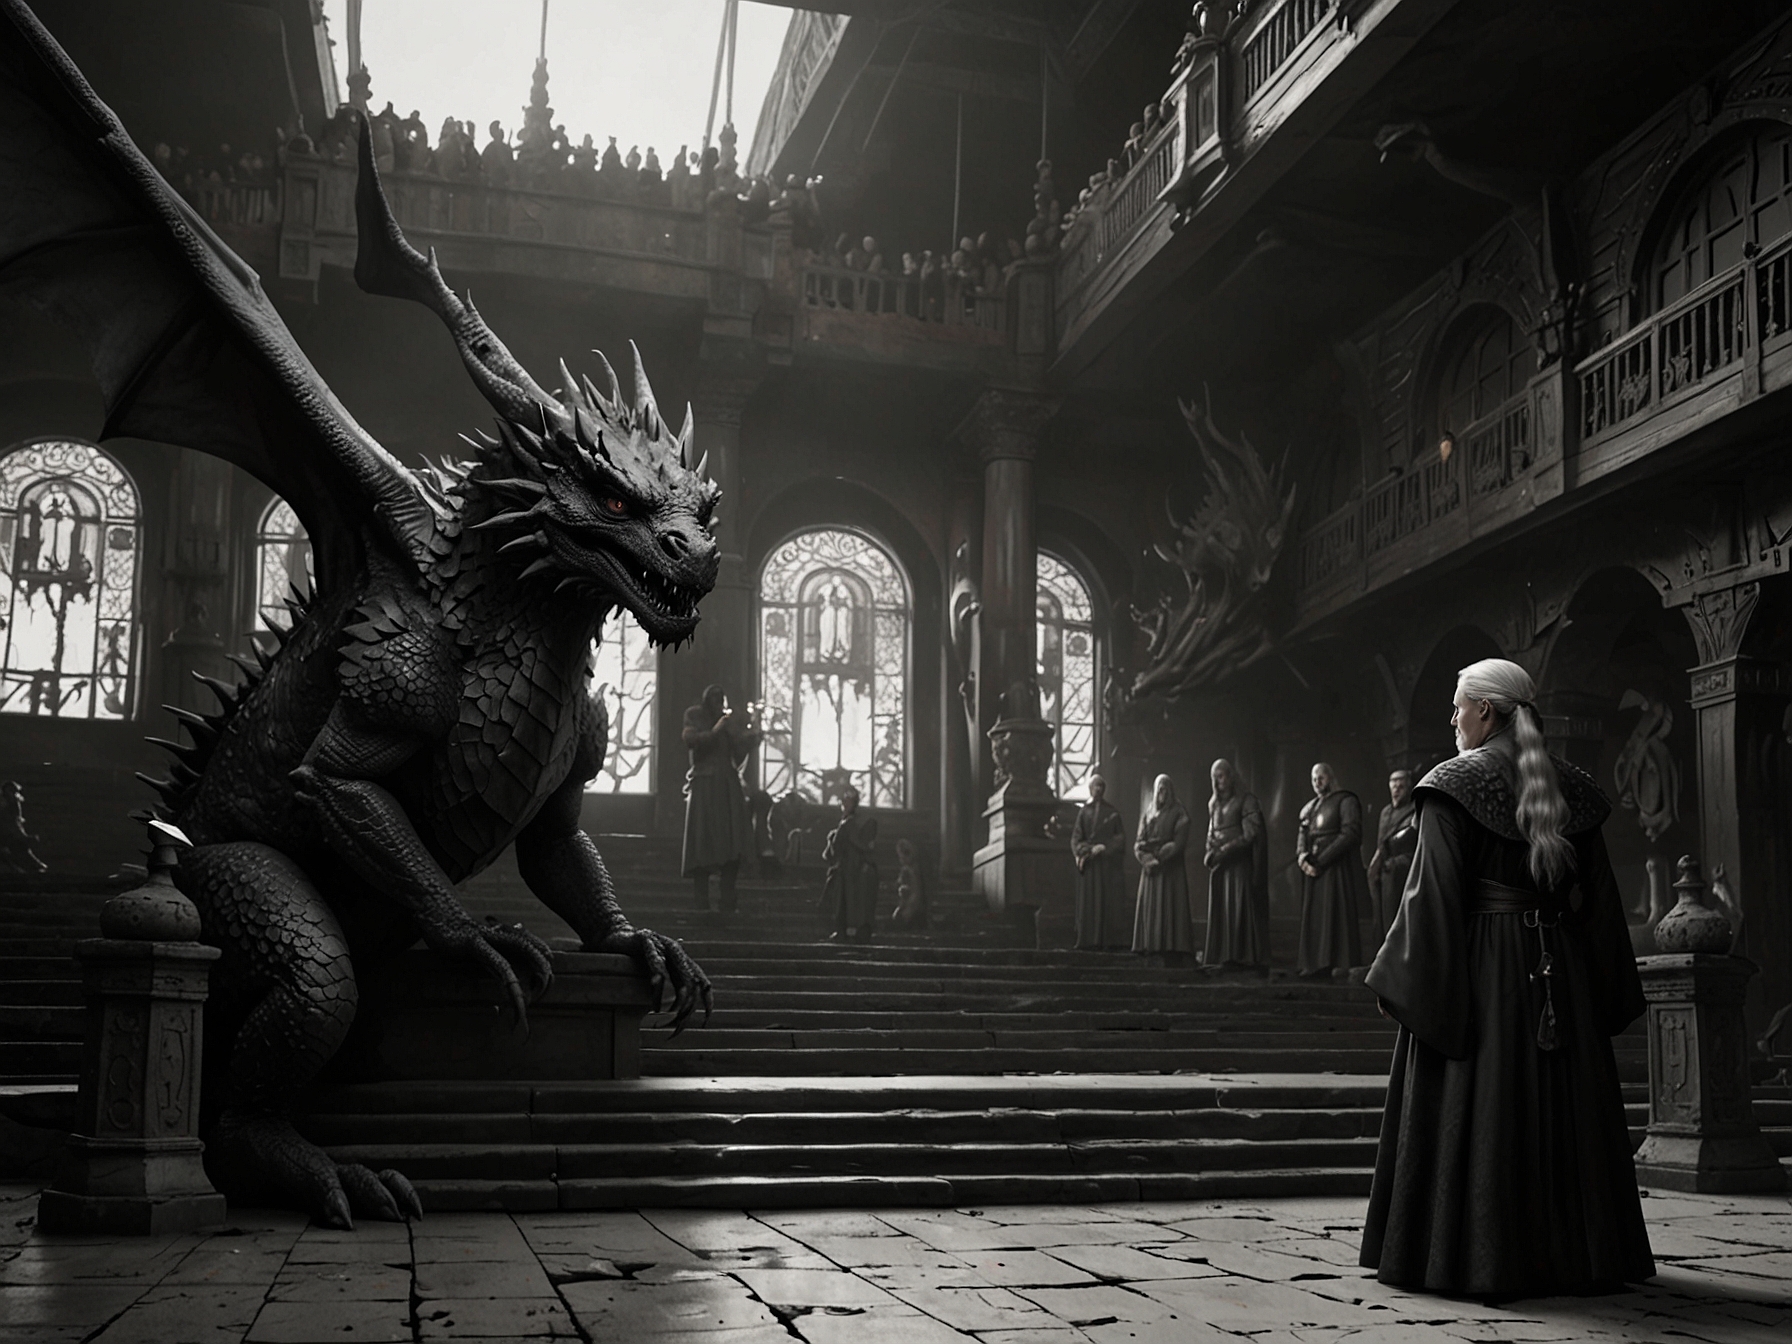 An alluring scene from 'House Of The Dragon,' showcasing the elaborate set designs and majestic dragons, capturing the intricate political drama and high stakes of the Targaryen civil war.